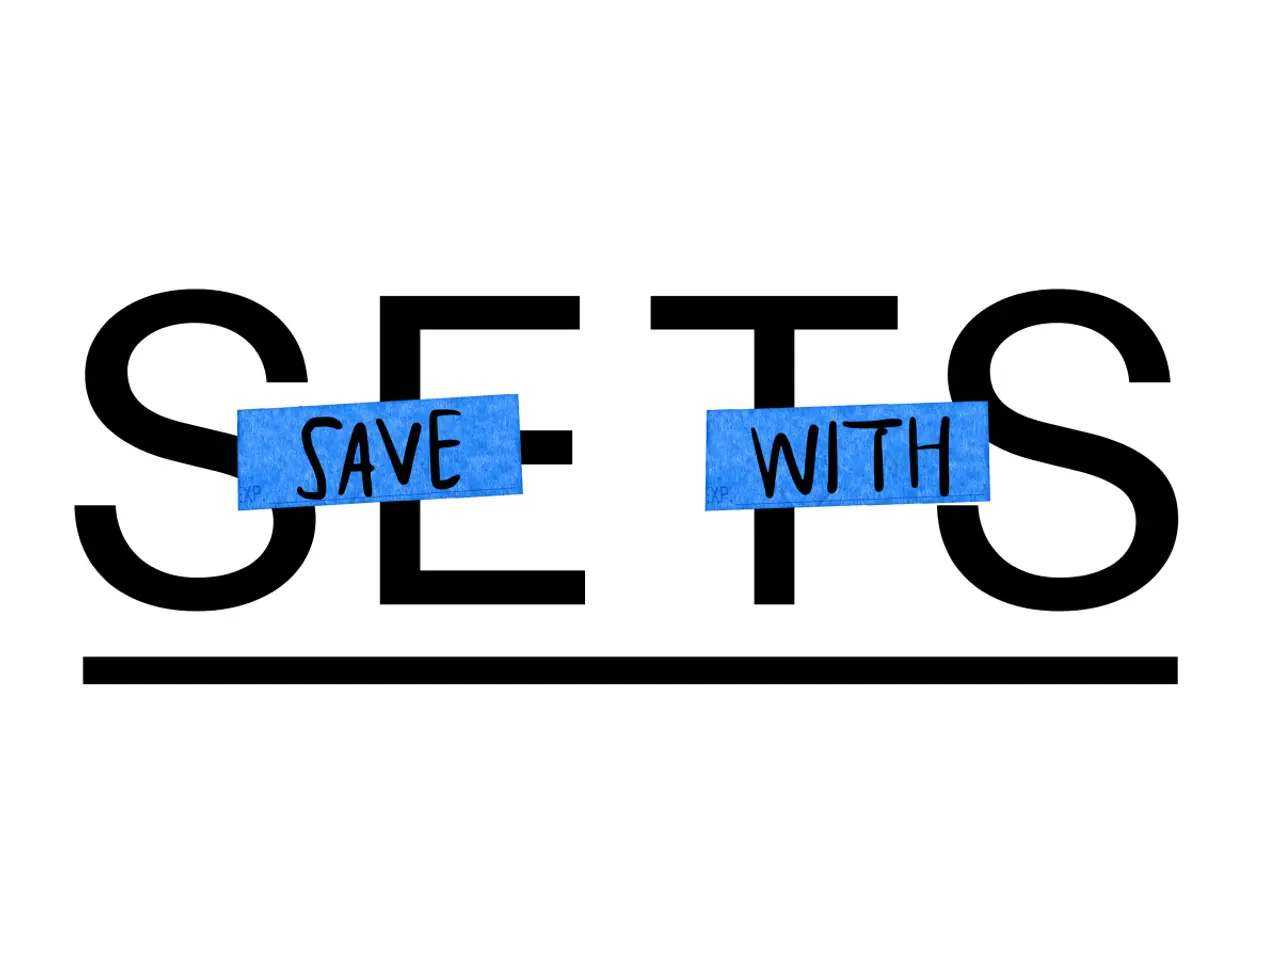 The image shows a creative typographic design that reads "save with sets," with the words "SAVE" and "WITH" inserted into the word "SETS," divided by blue tape-like elements.